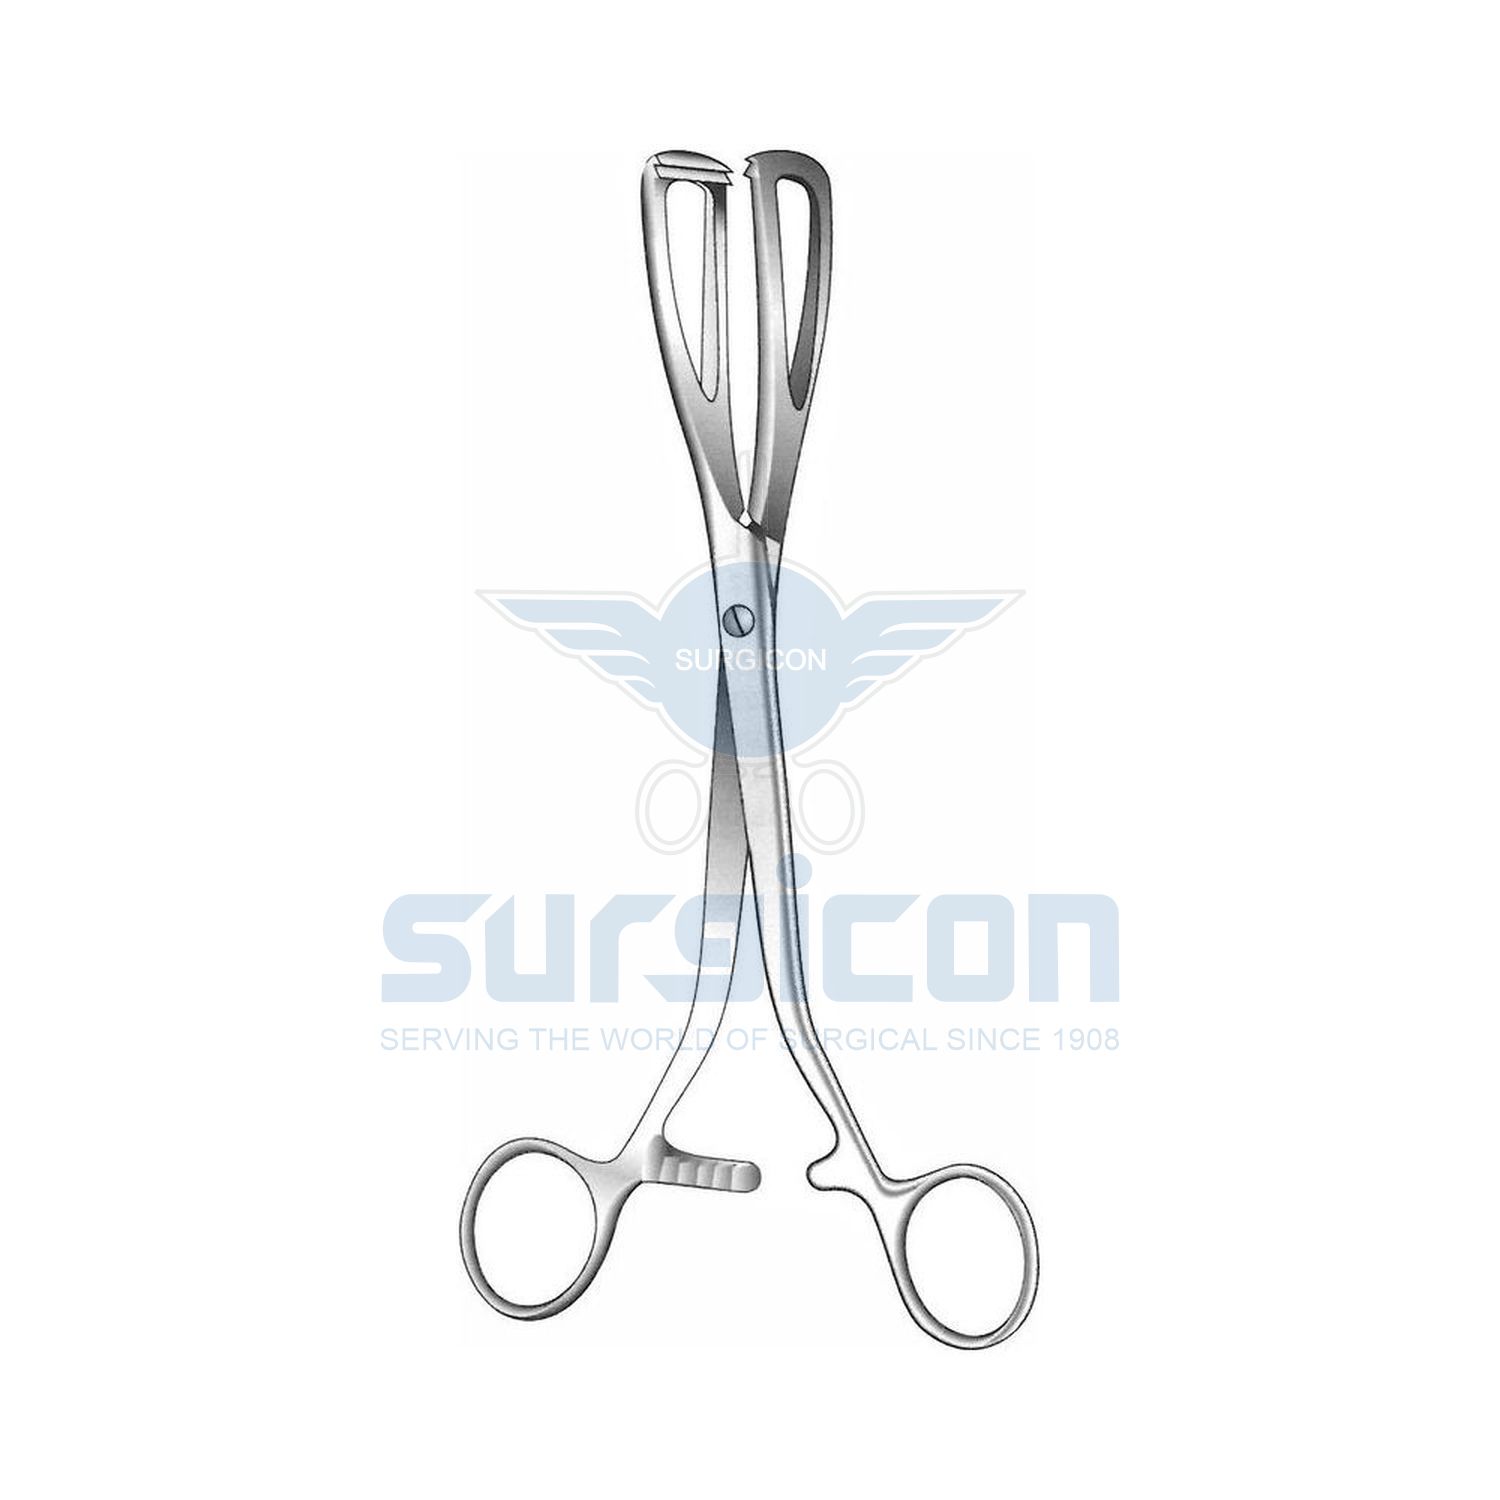 Young-Lithotomy-Forcep-J-38-211